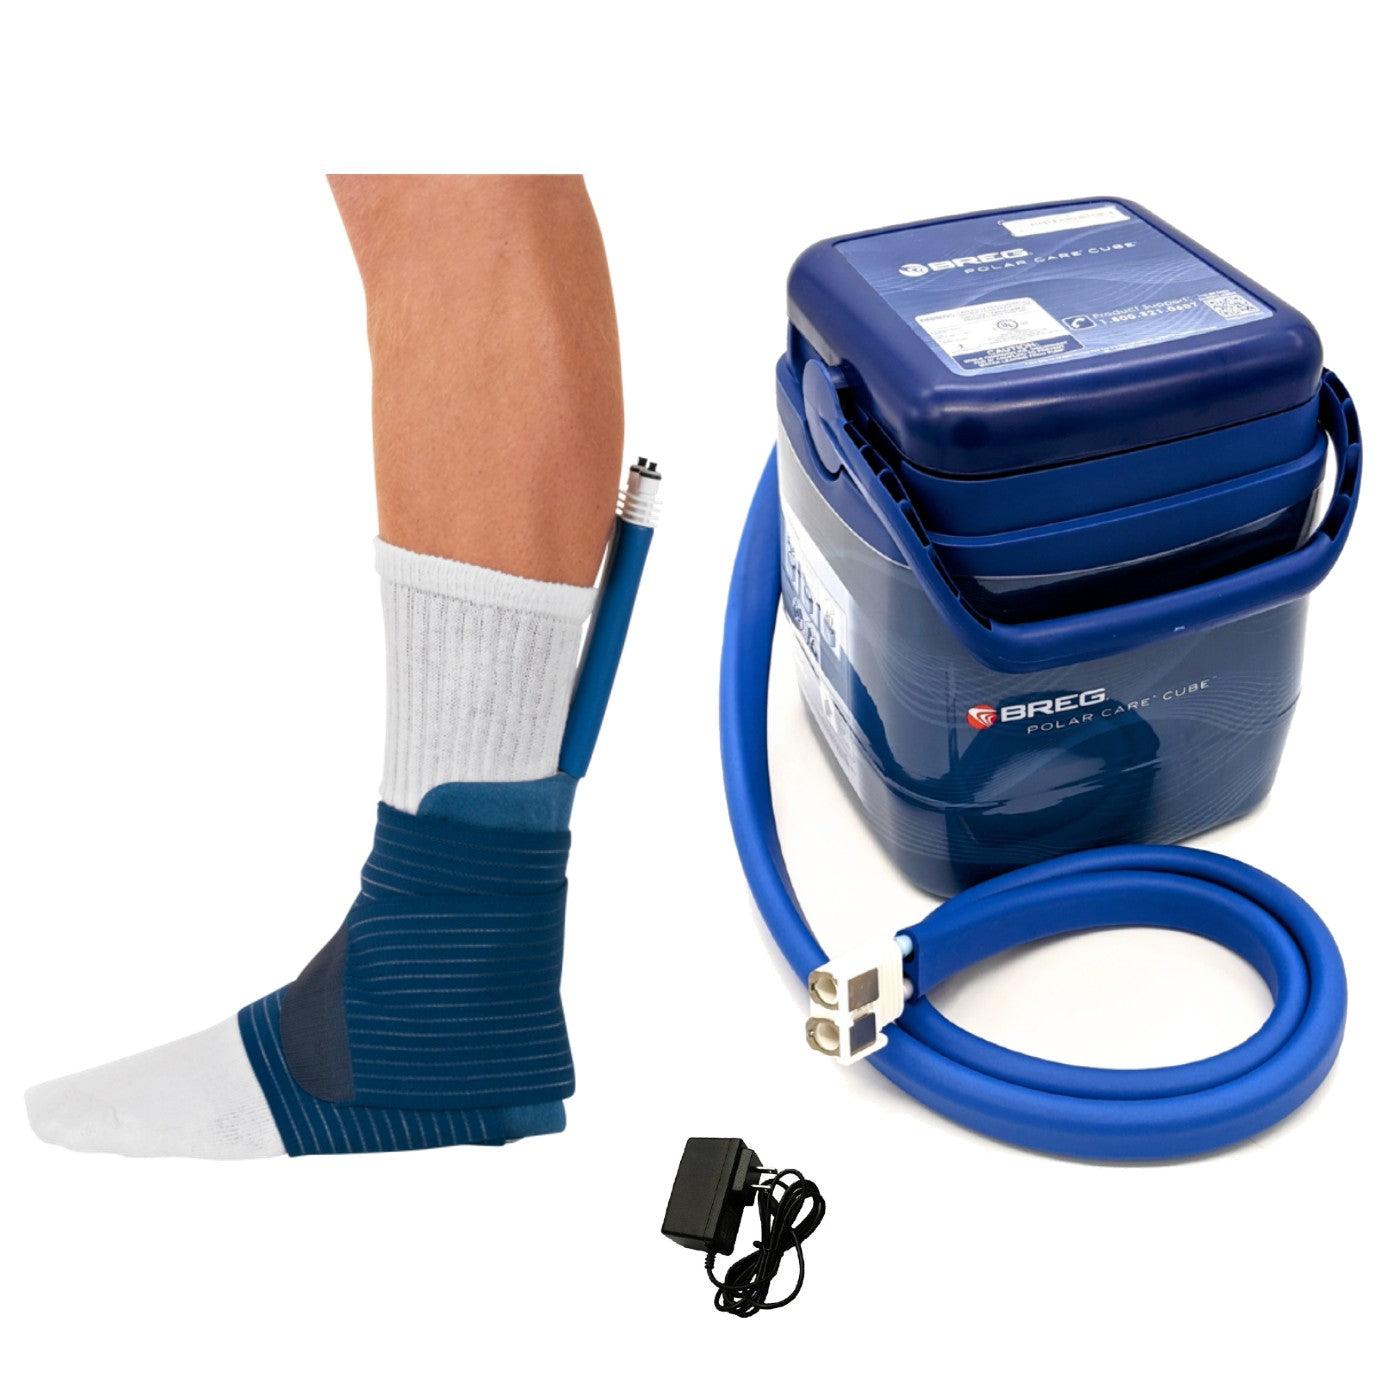 Breg® Polar Care Cube System w/ Wrap-On Pads - 04730-000 Breg® Polar Care Cube System w/ Wrap-On Pads - undefined by Supply Physical Therapy Breg, Cold Therapy Units, Combos, Cube